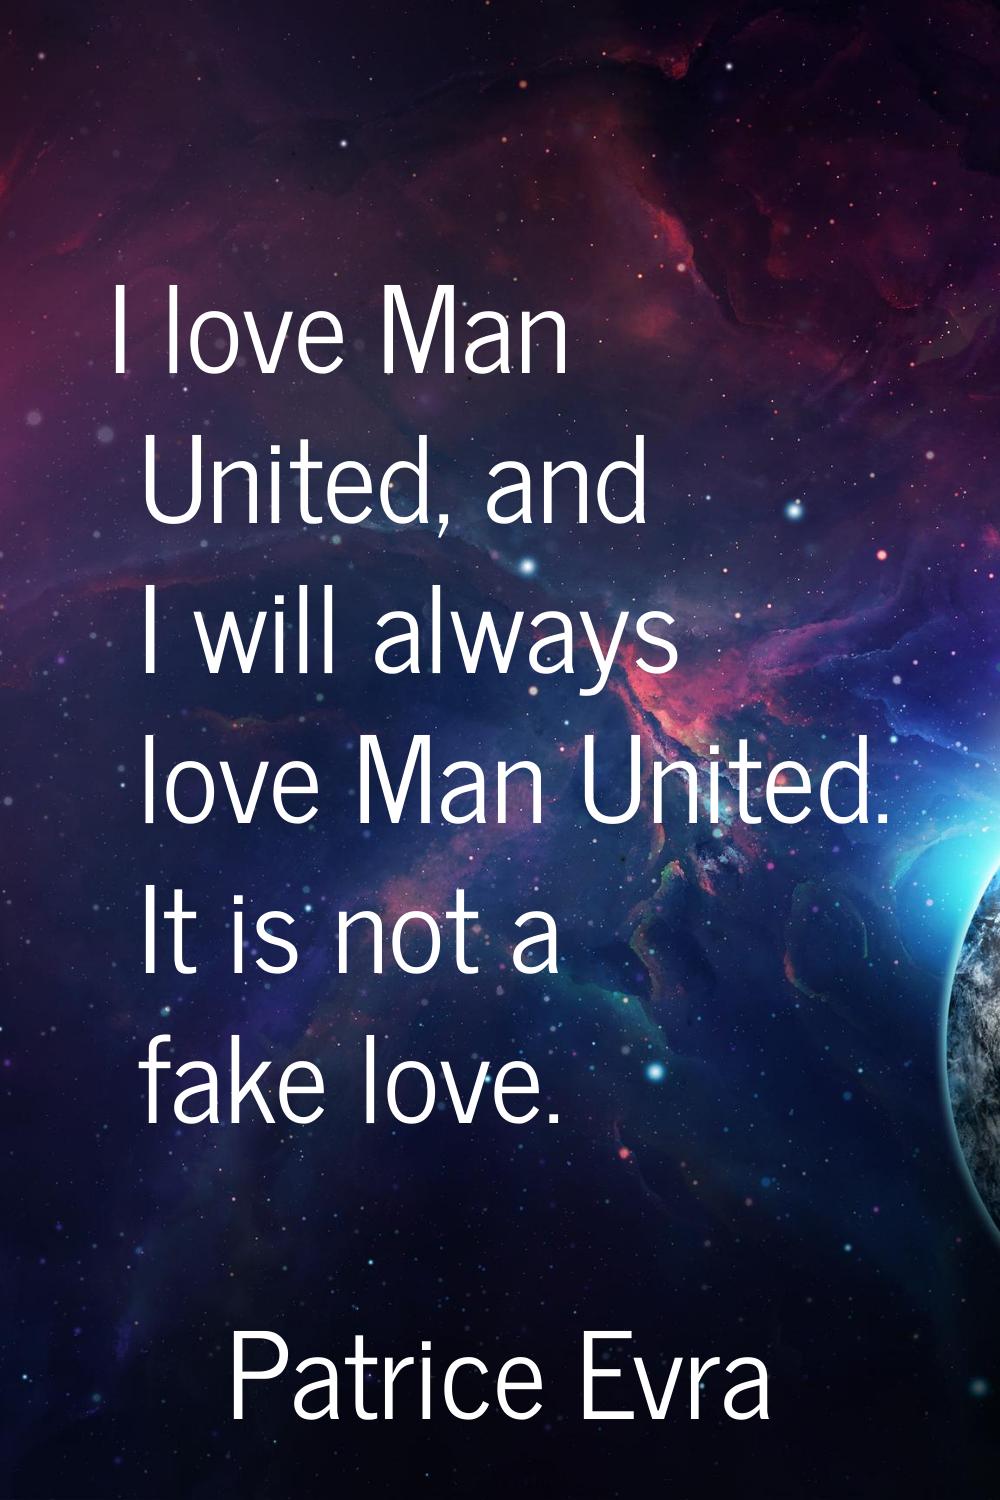 I love Man United, and I will always love Man United. It is not a fake love.